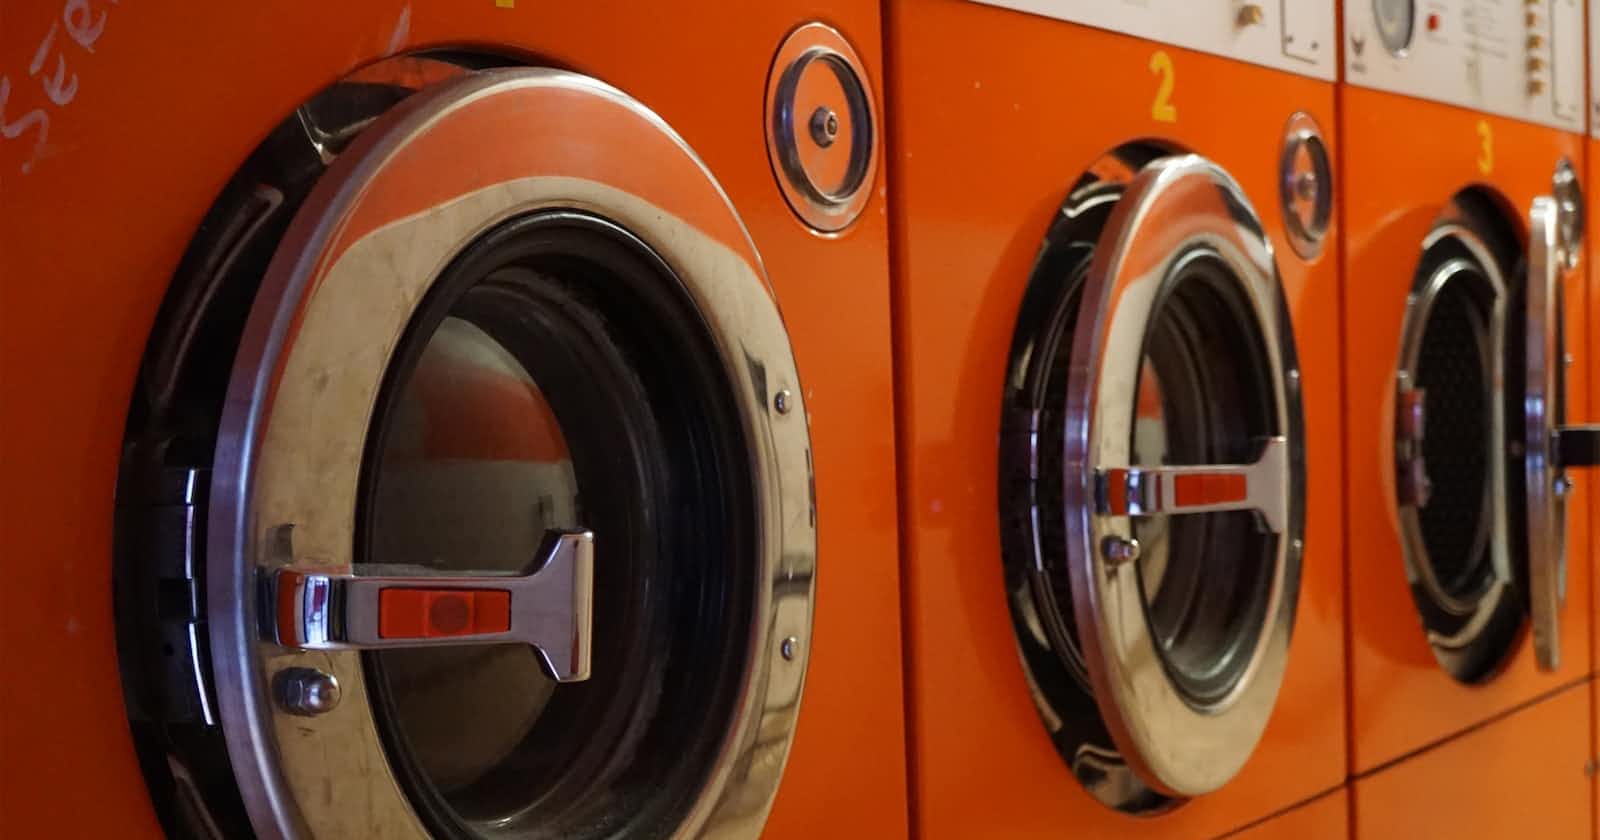 HomeAssistant: detect washing machine cycle completion